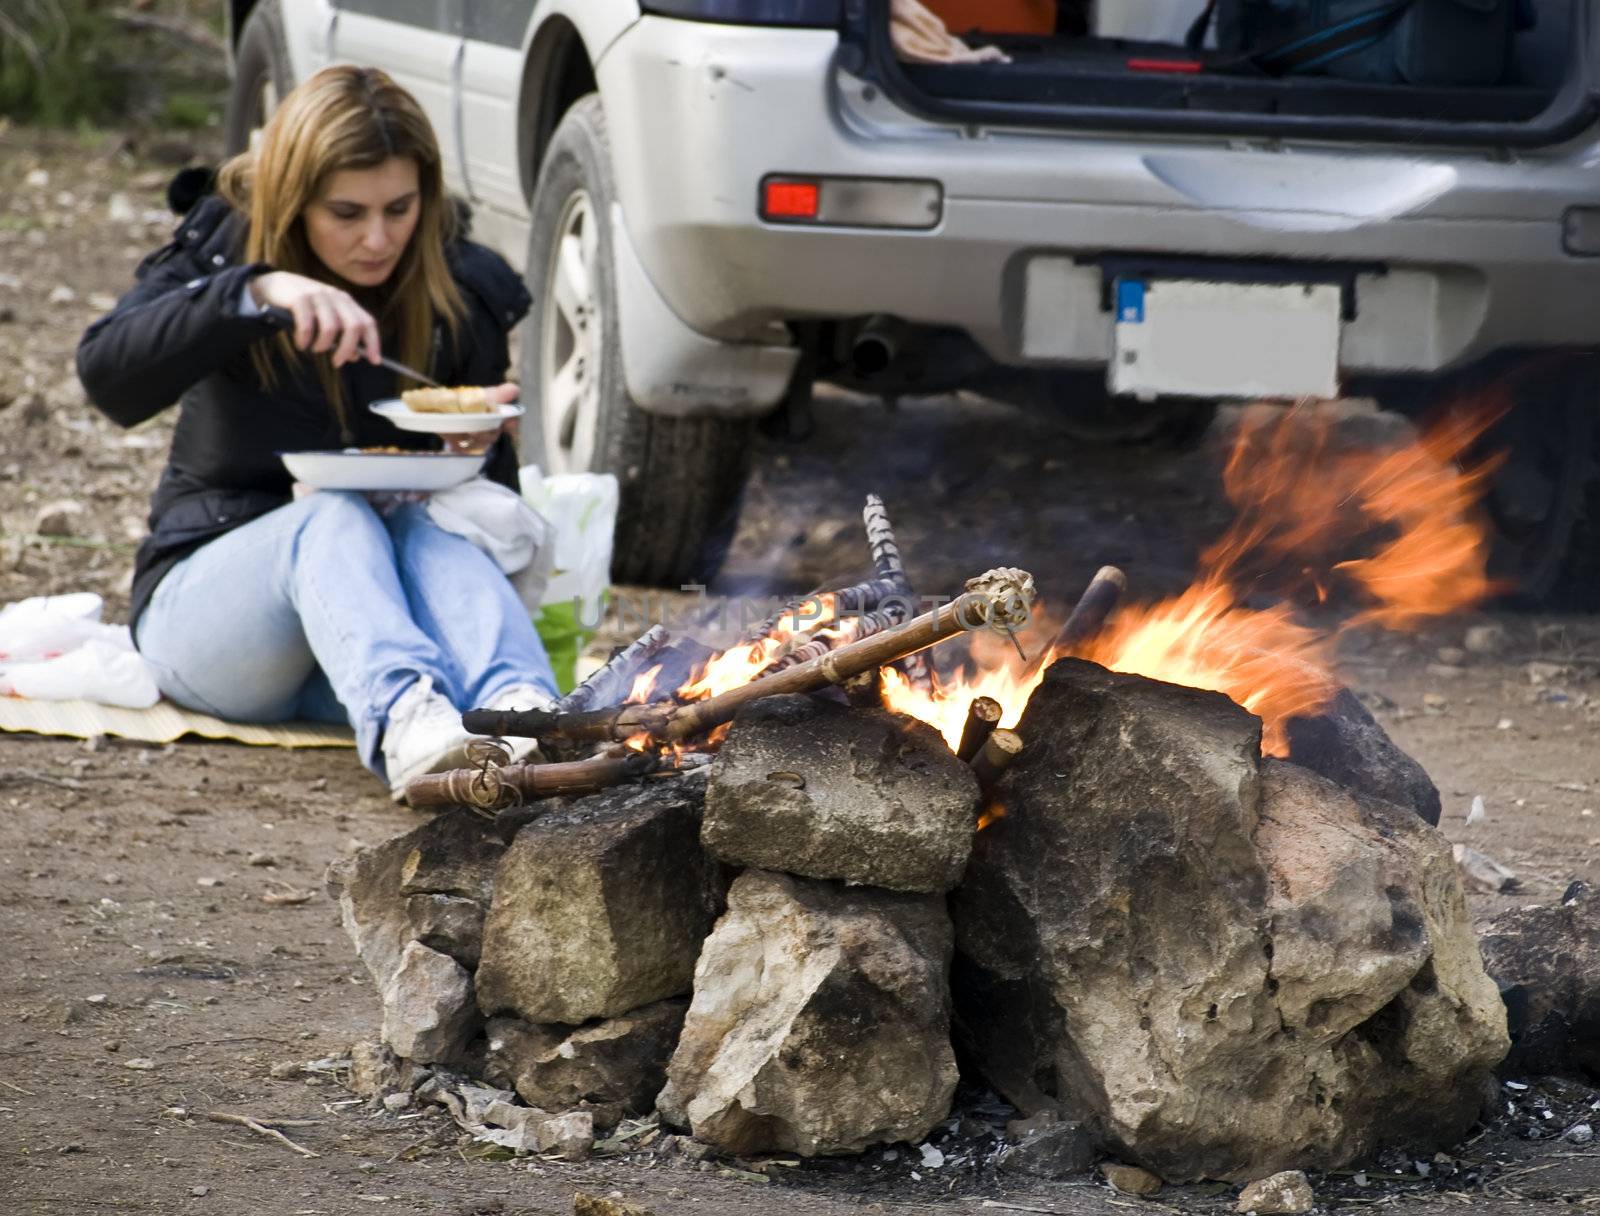 A woman next to SUV and burning bonfire excellent to portray outdoor leisure activities such as camping